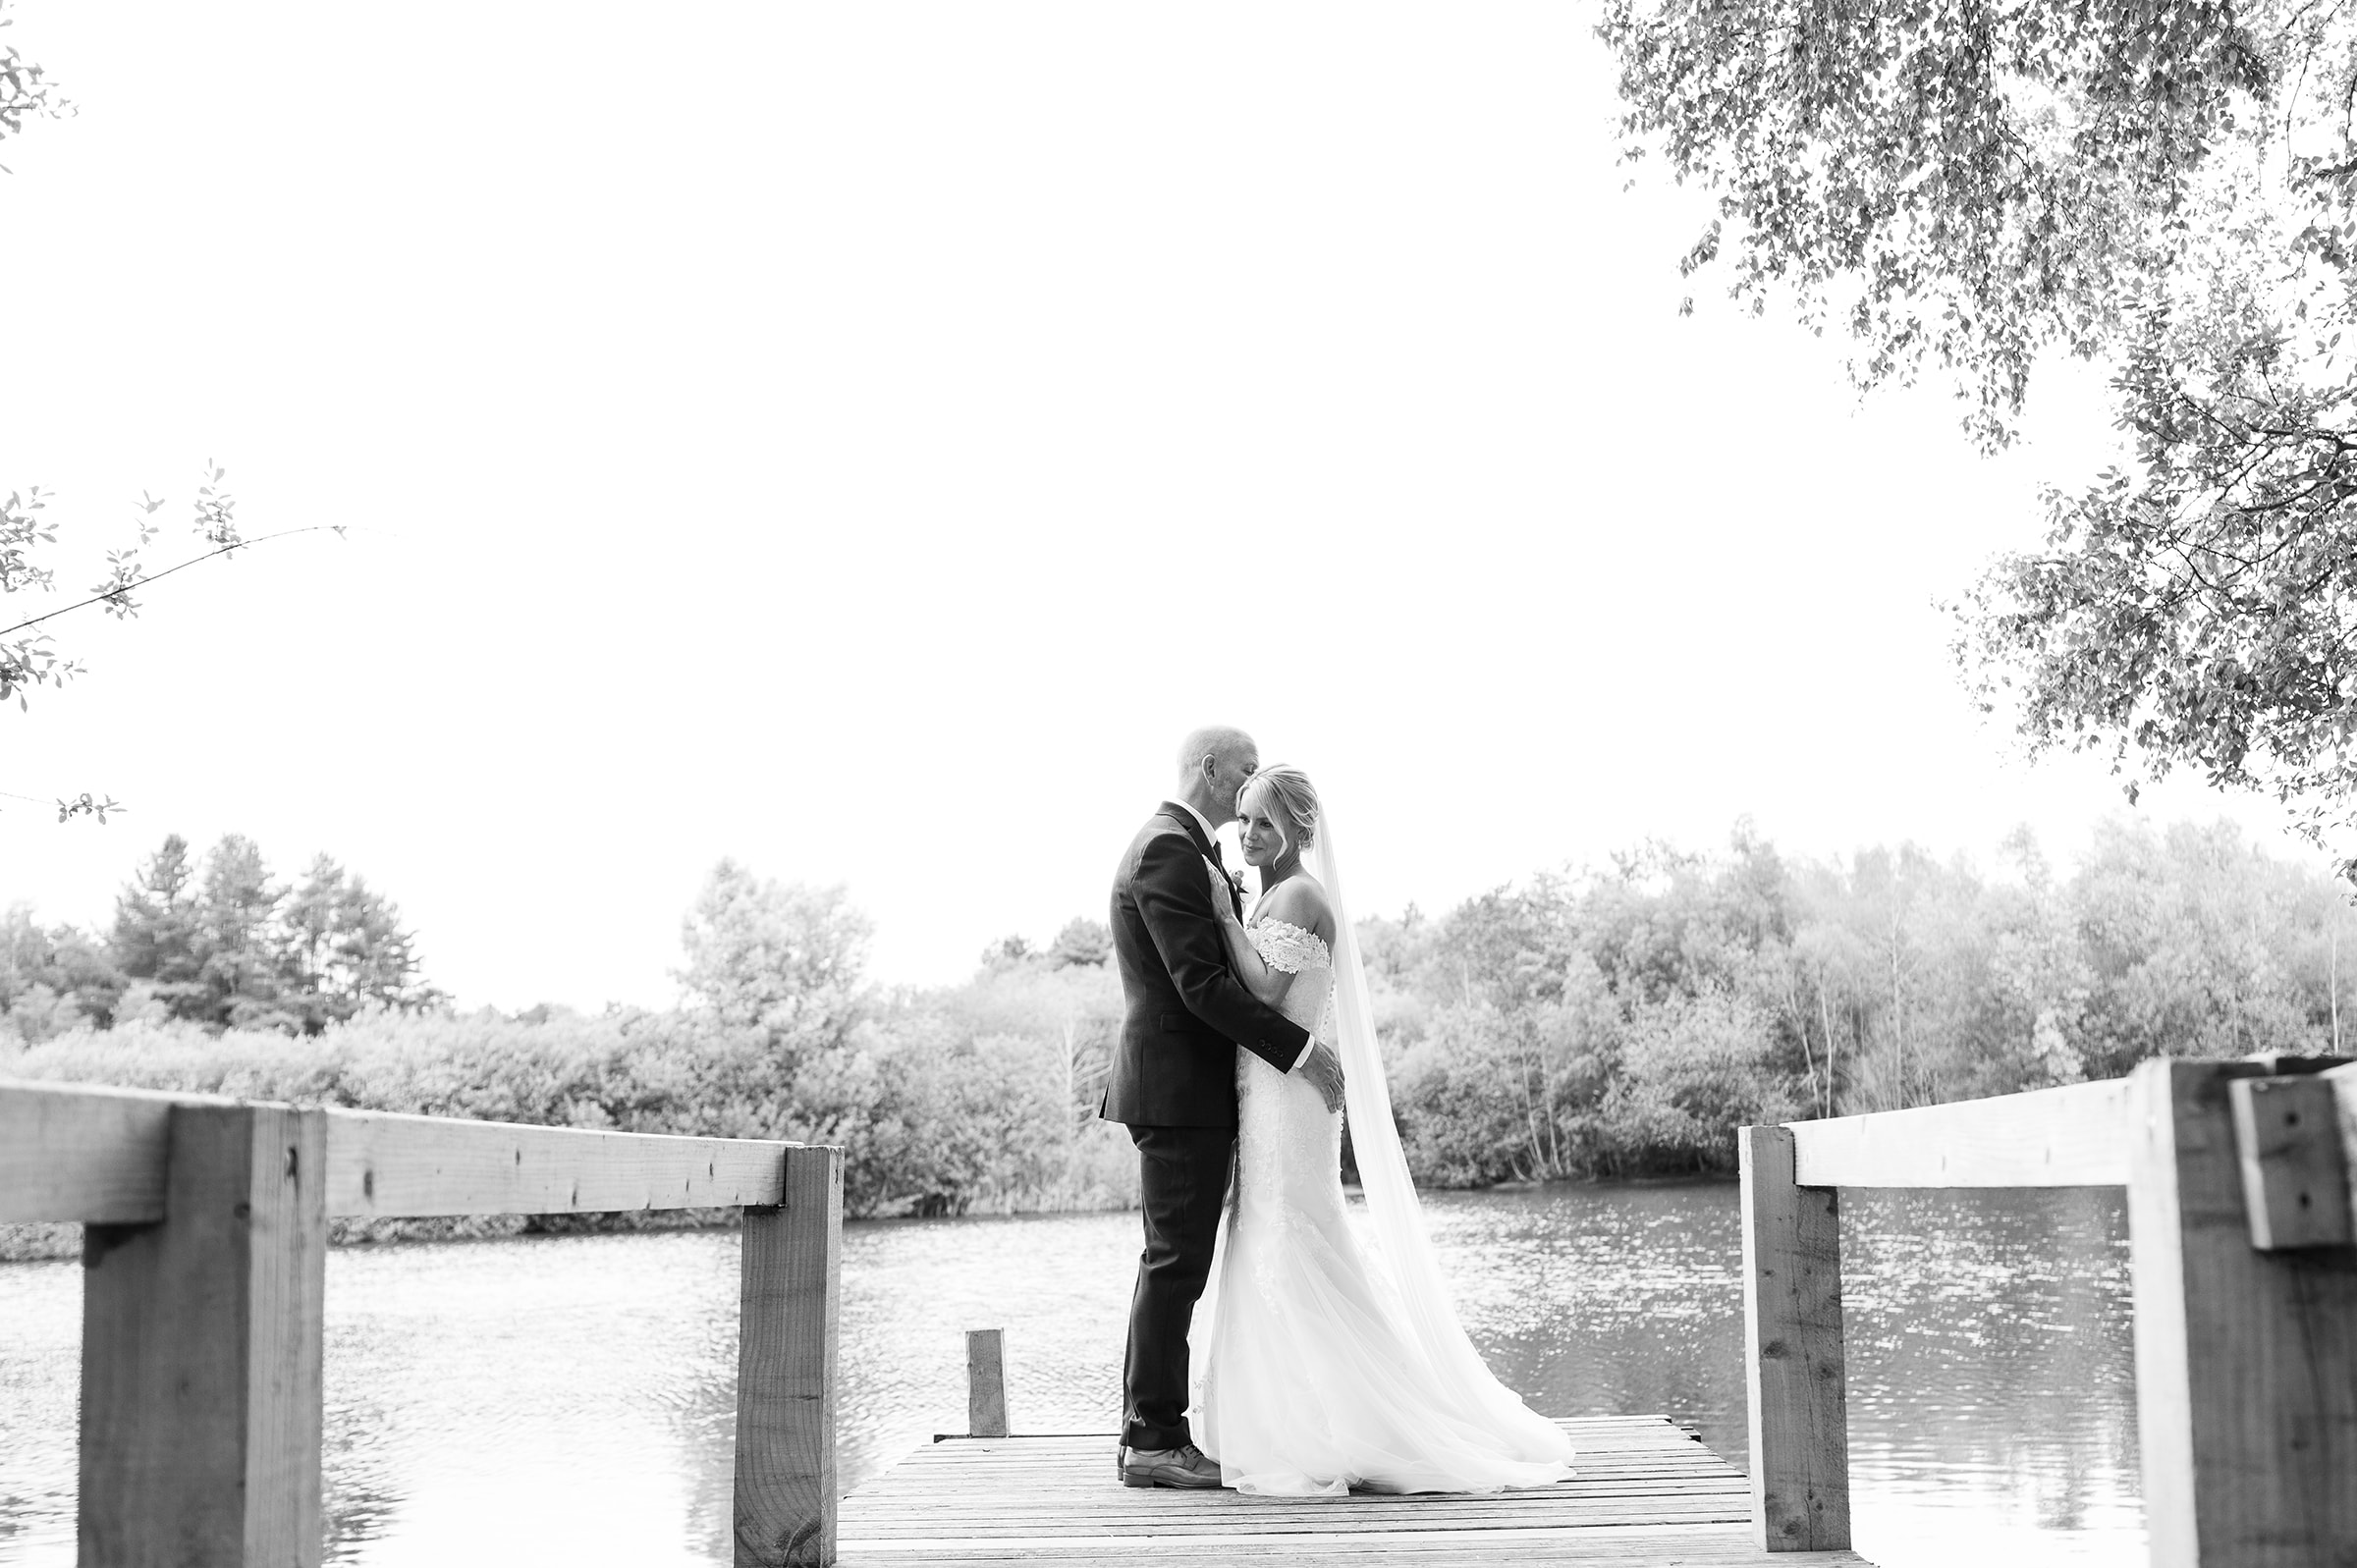 A couple on the Jetty at Nunsmere Hall, Cheshire 